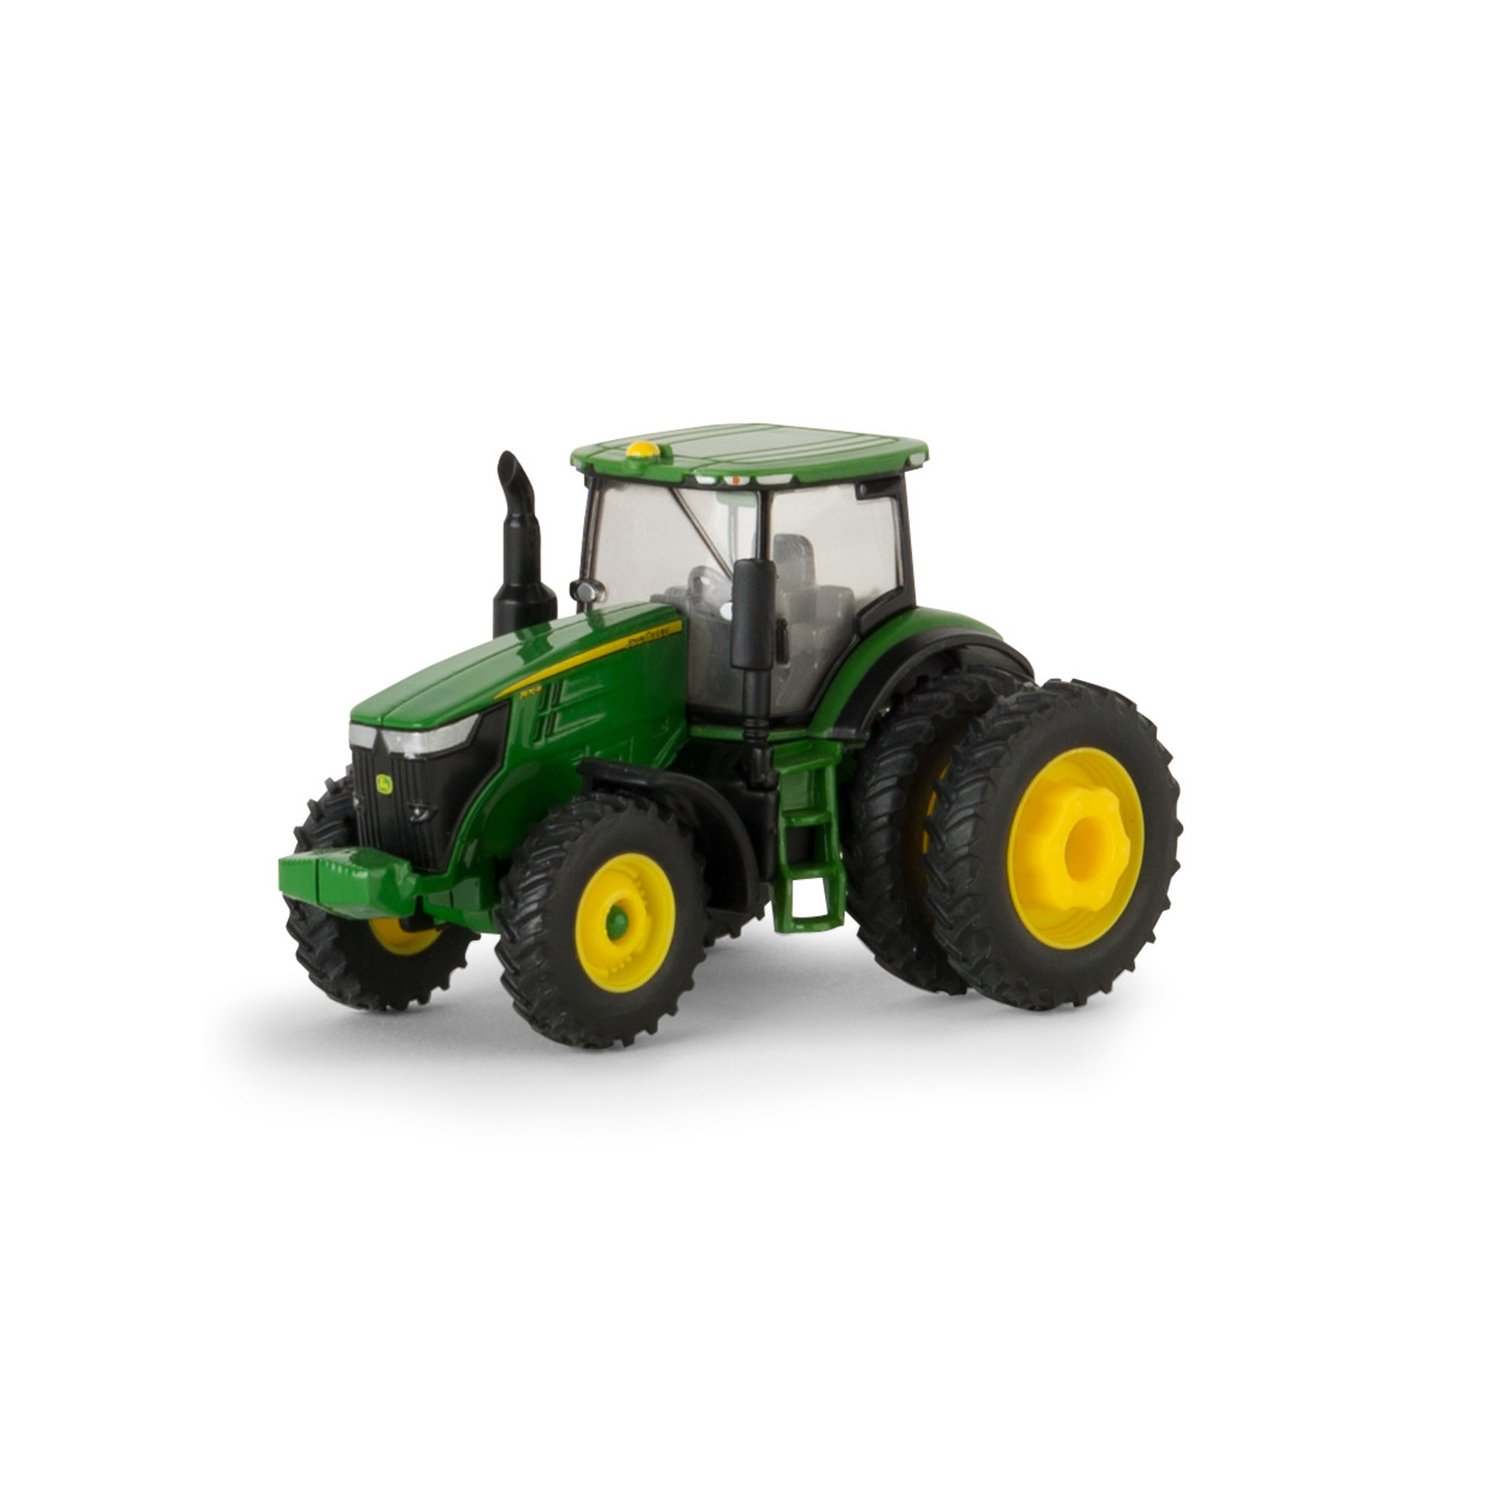 1/64 Jd 7270r Tractor